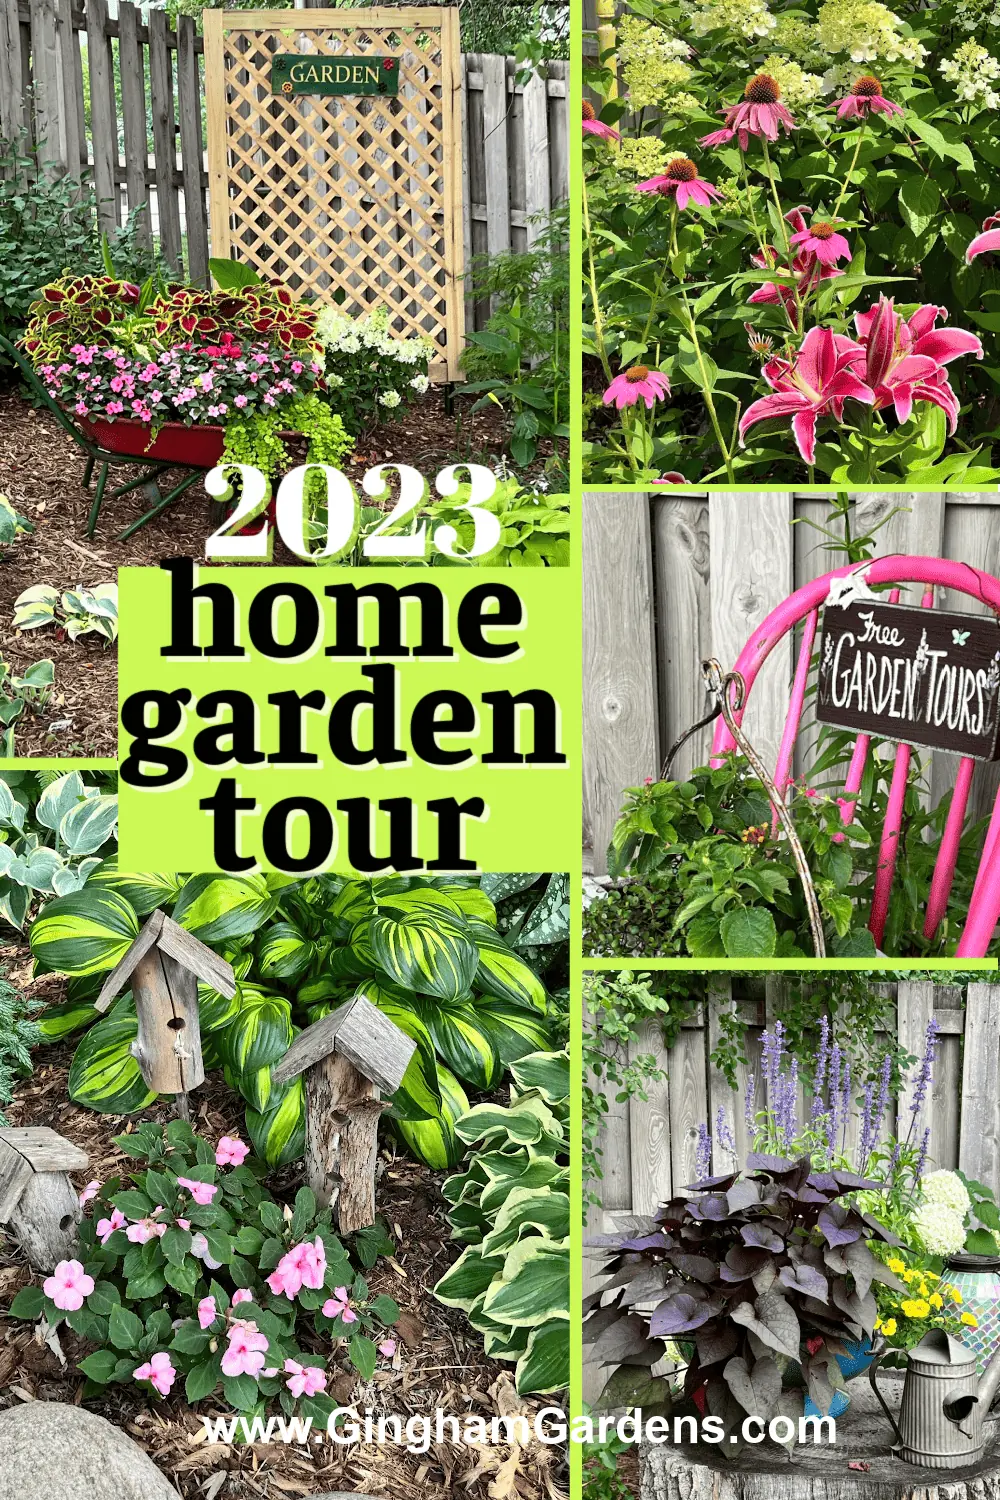 Collage with images of flower gardens and garden art.